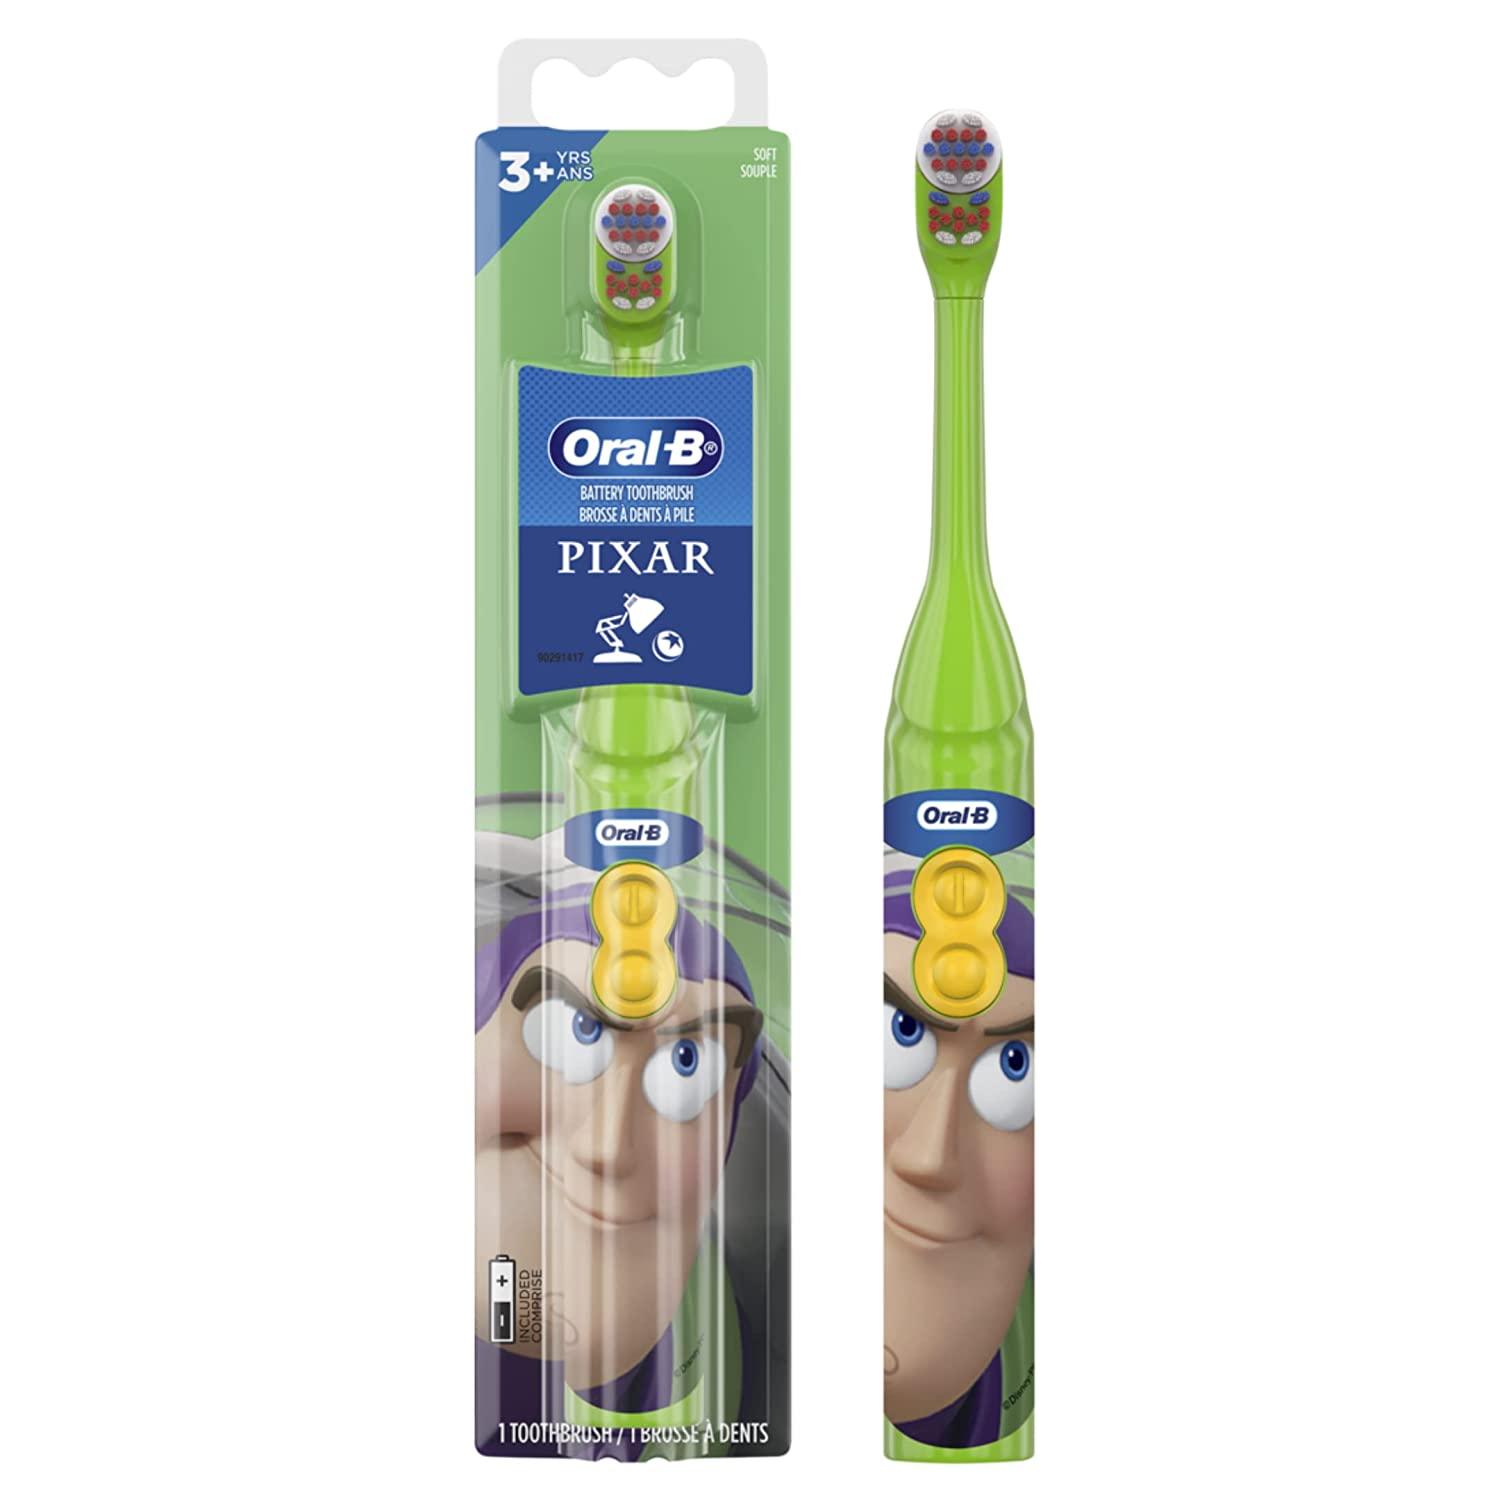 Oral-B Kid's Battery Toothbrush featuring Disney Pixar Toy Story, Soft Bristles